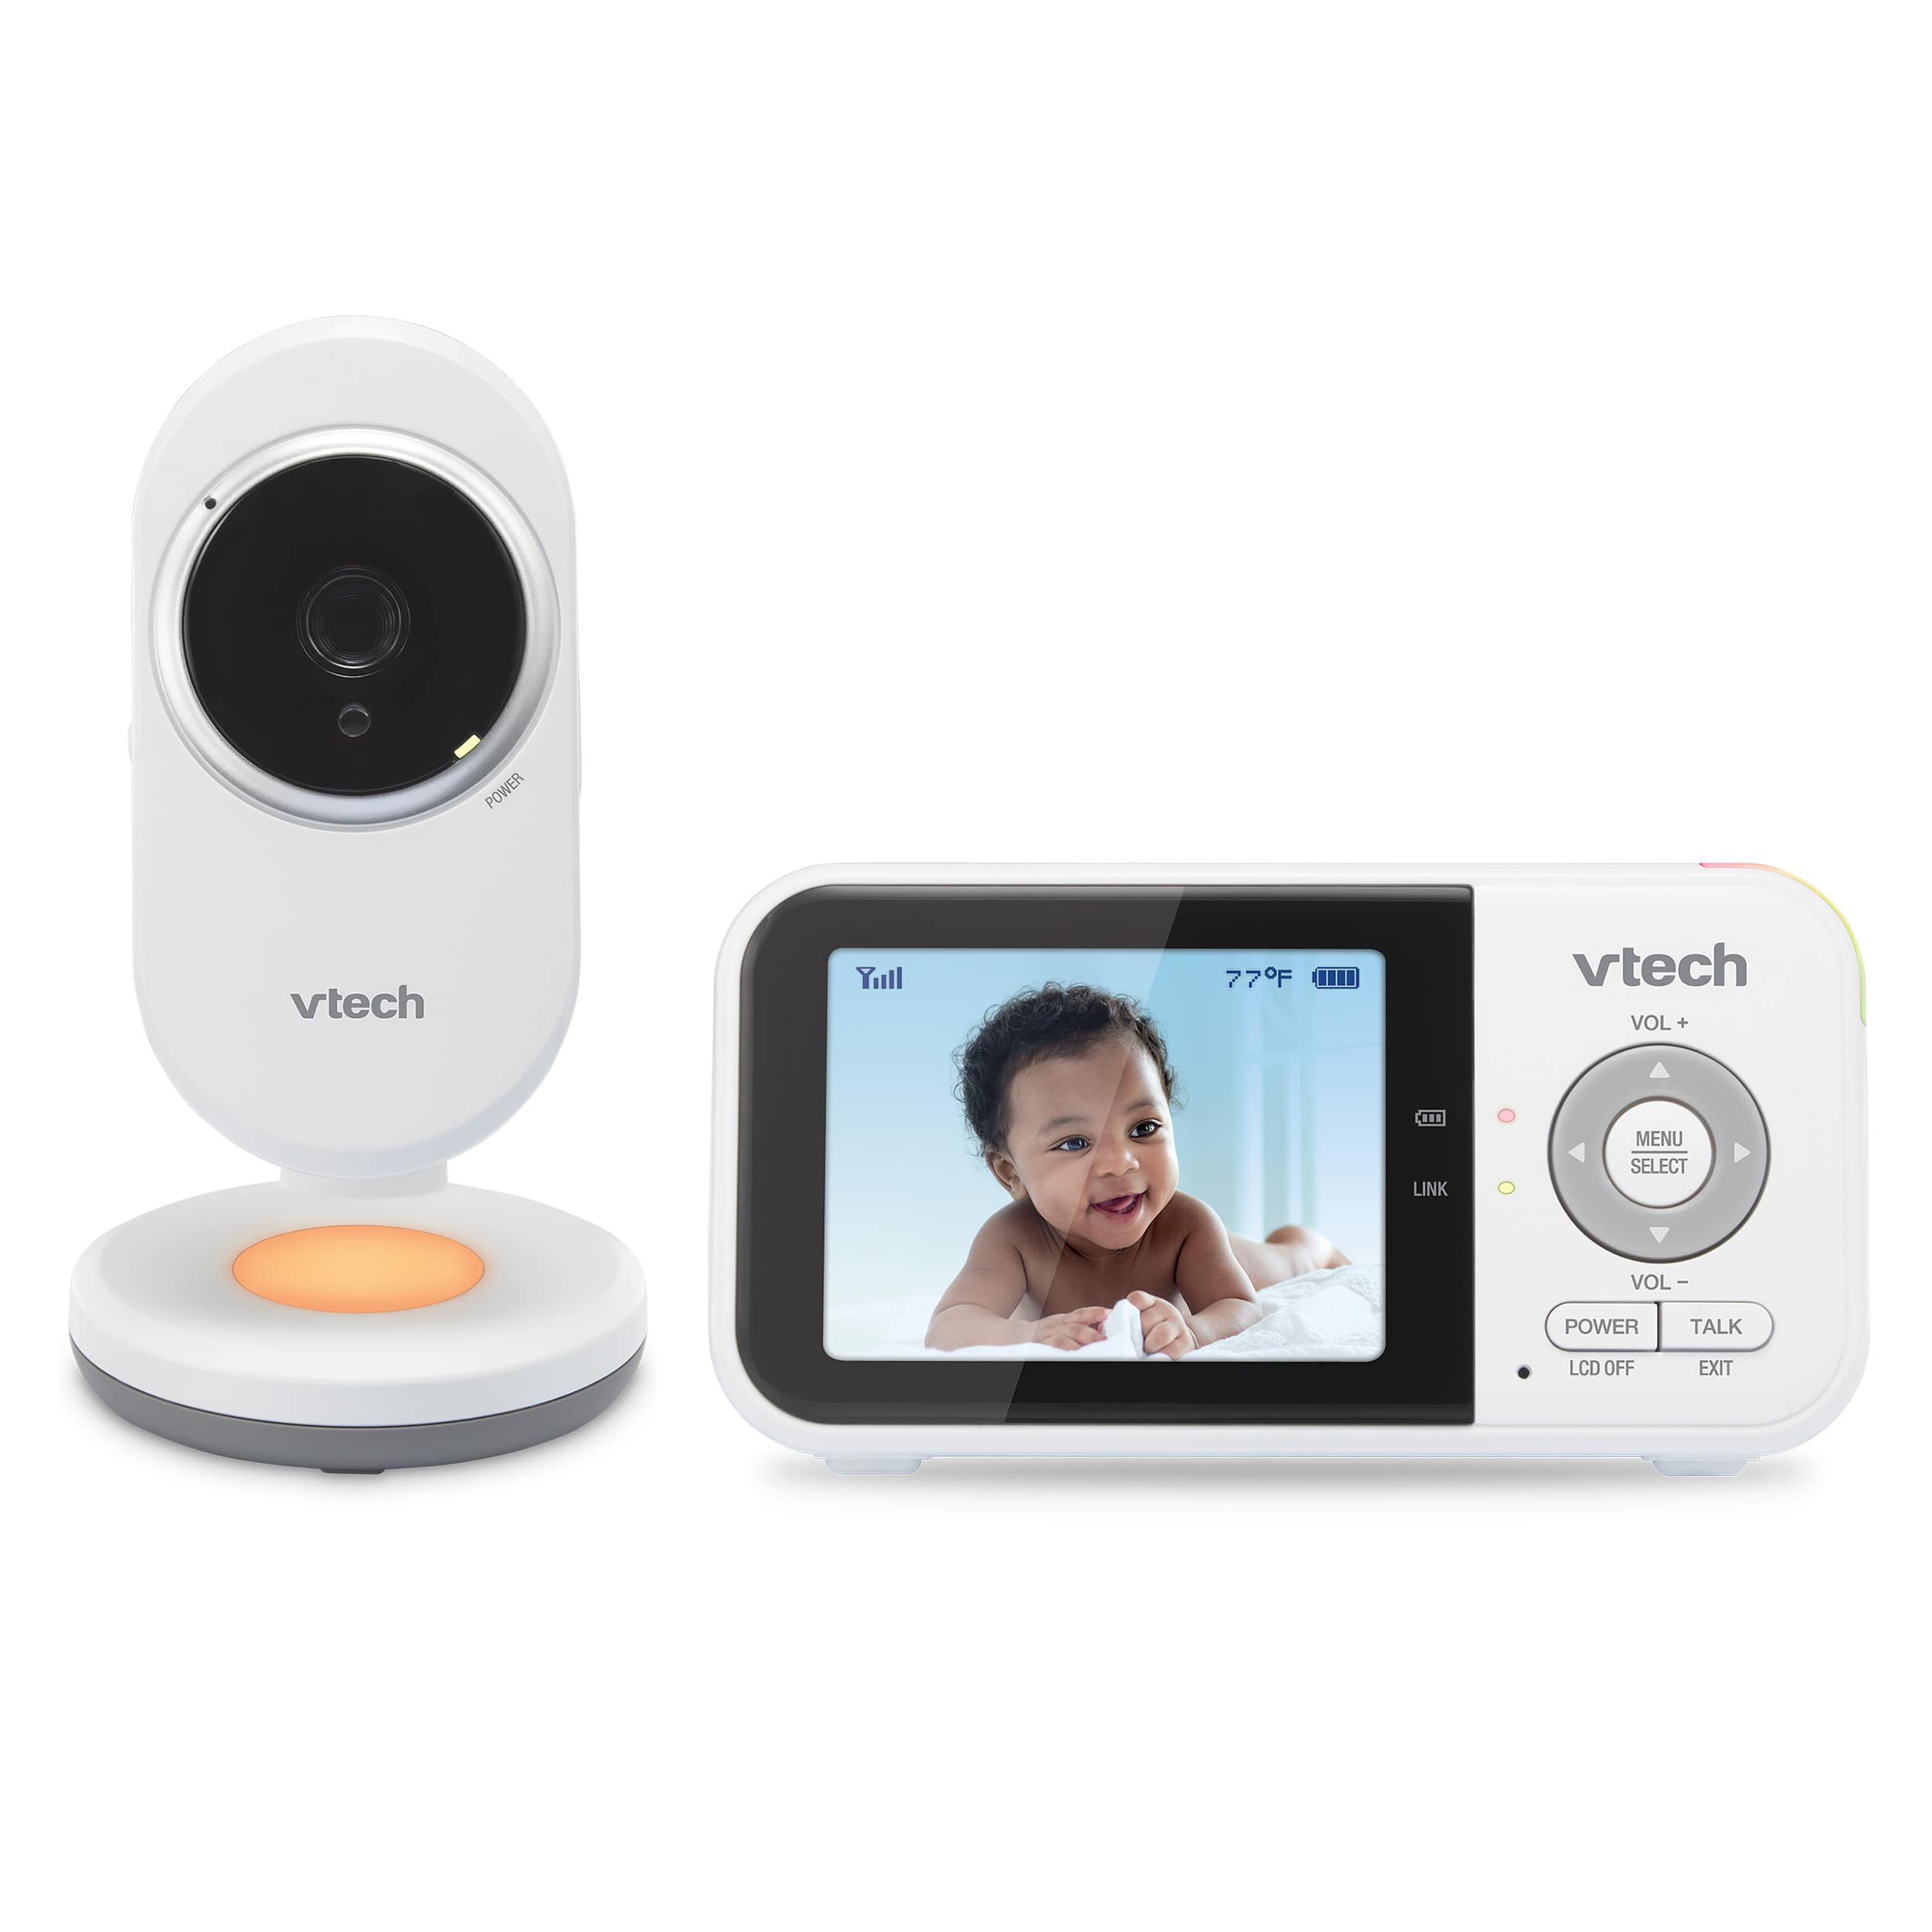 2.8" Digital Video Baby Monitor with Night Light - view 1